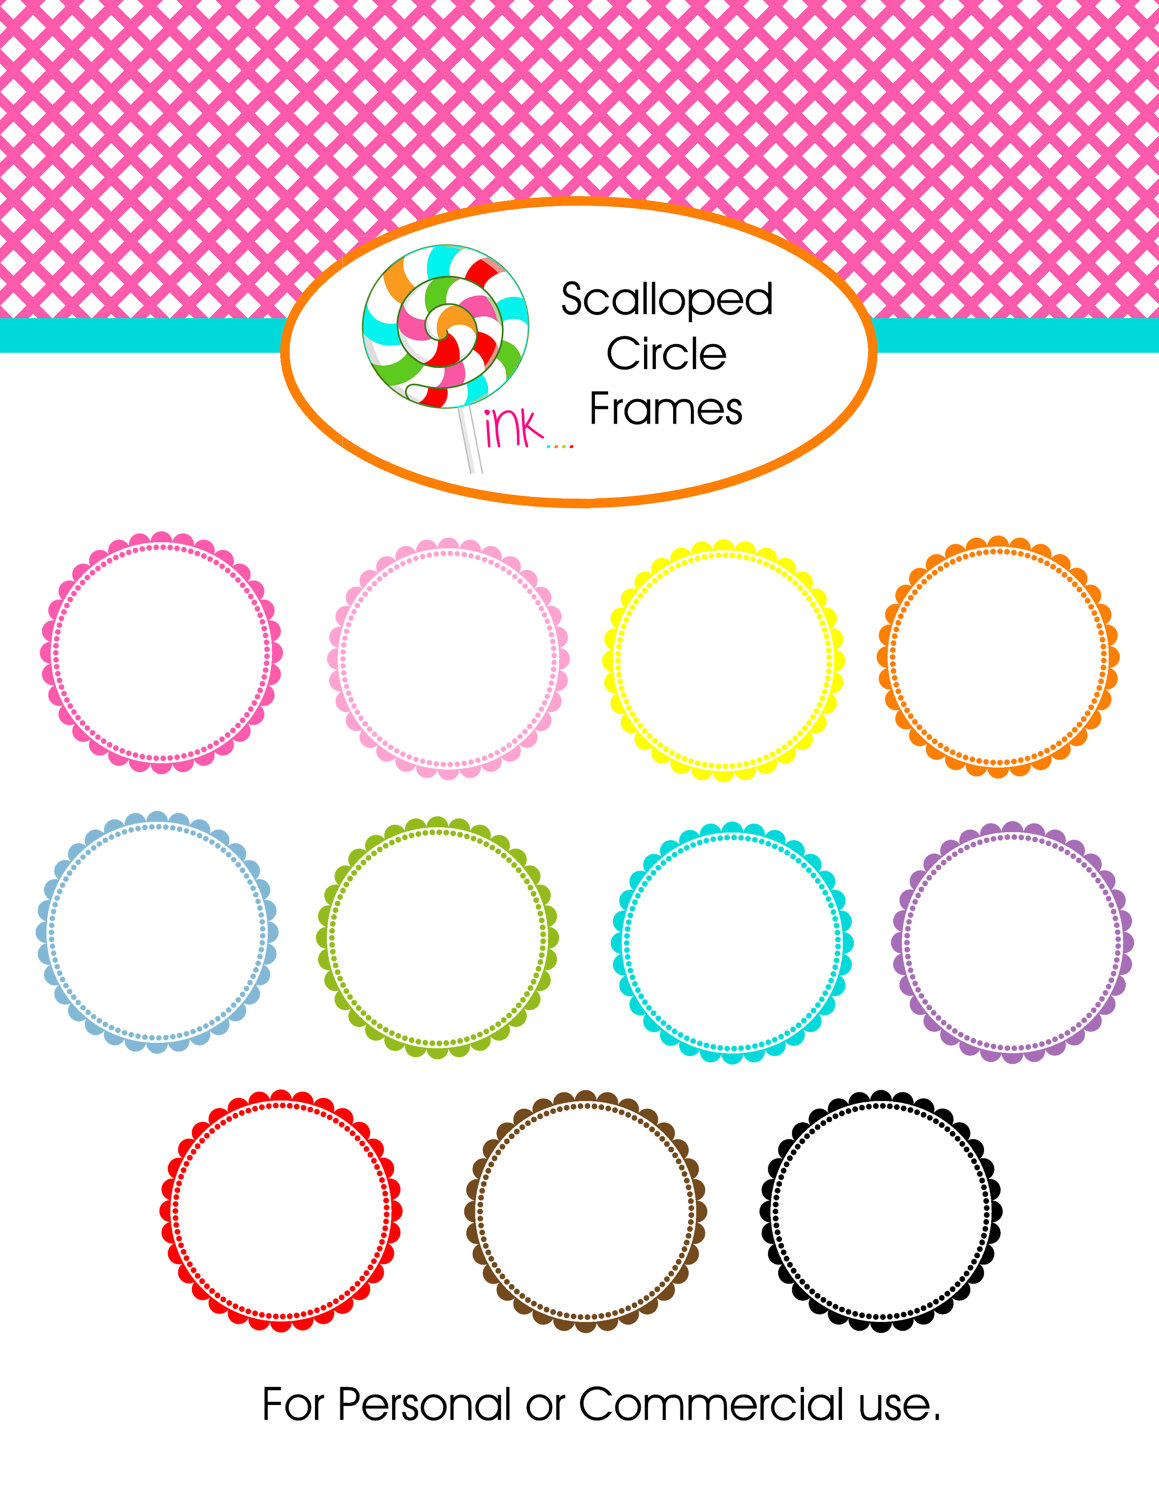 Digital Download Discoveries for SCALLOPED CIRCLES from EasyPeach.com